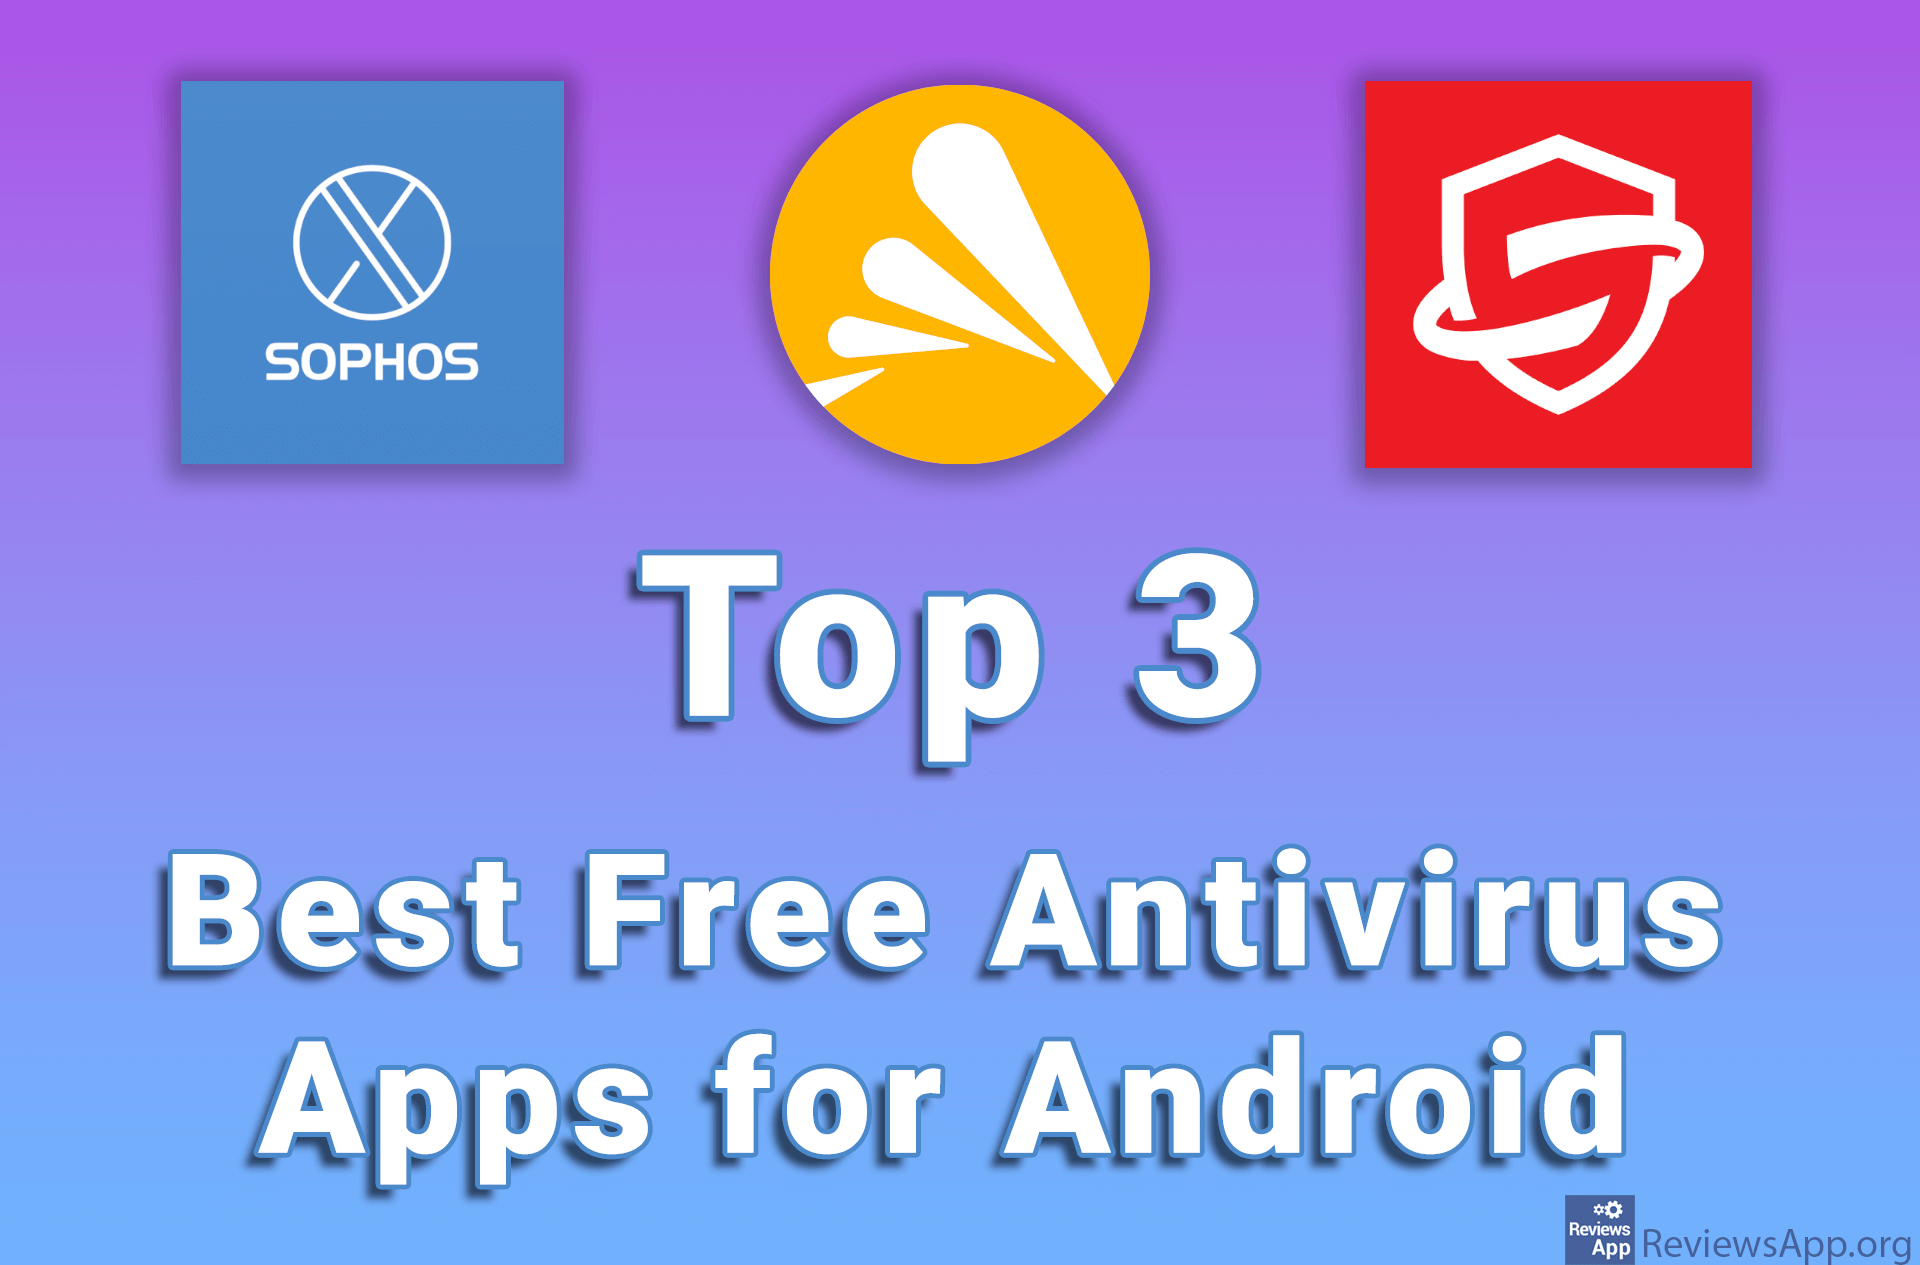 Top 3 Best Free Antivirus Apps for Android